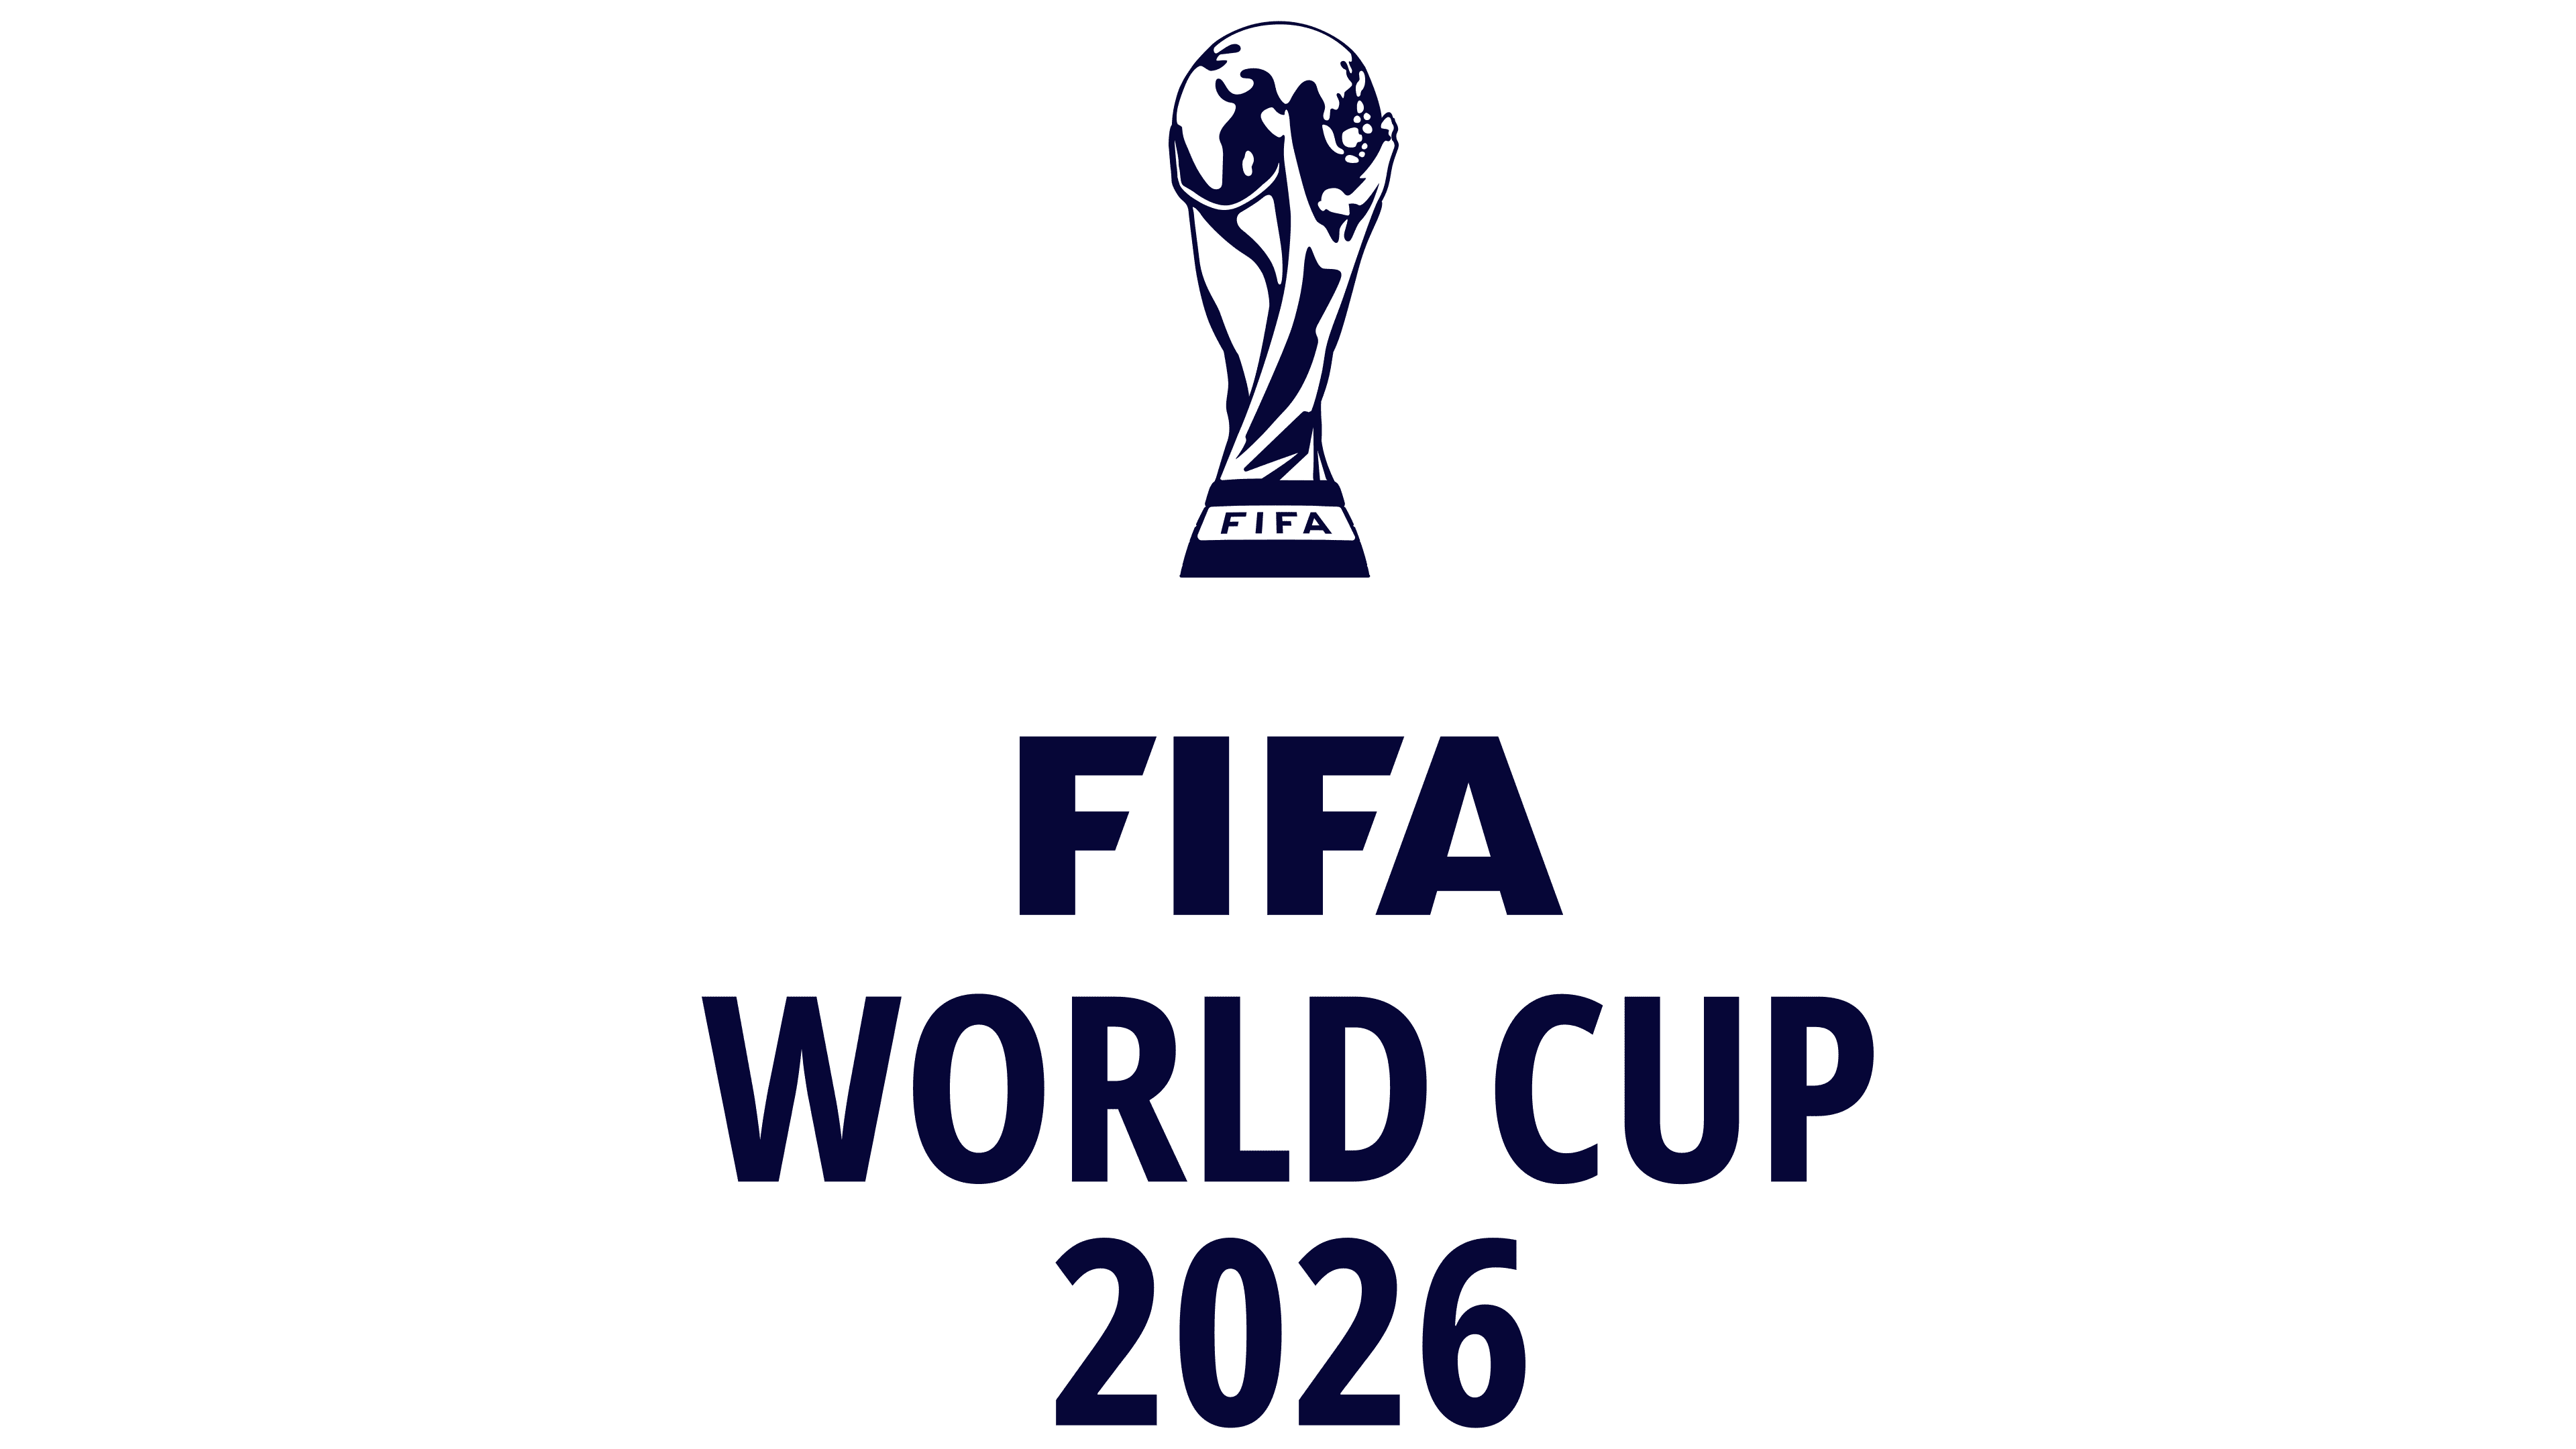 Download FIFA World Cup Logo in SVG Vector or PNG File Format - Logo.wine